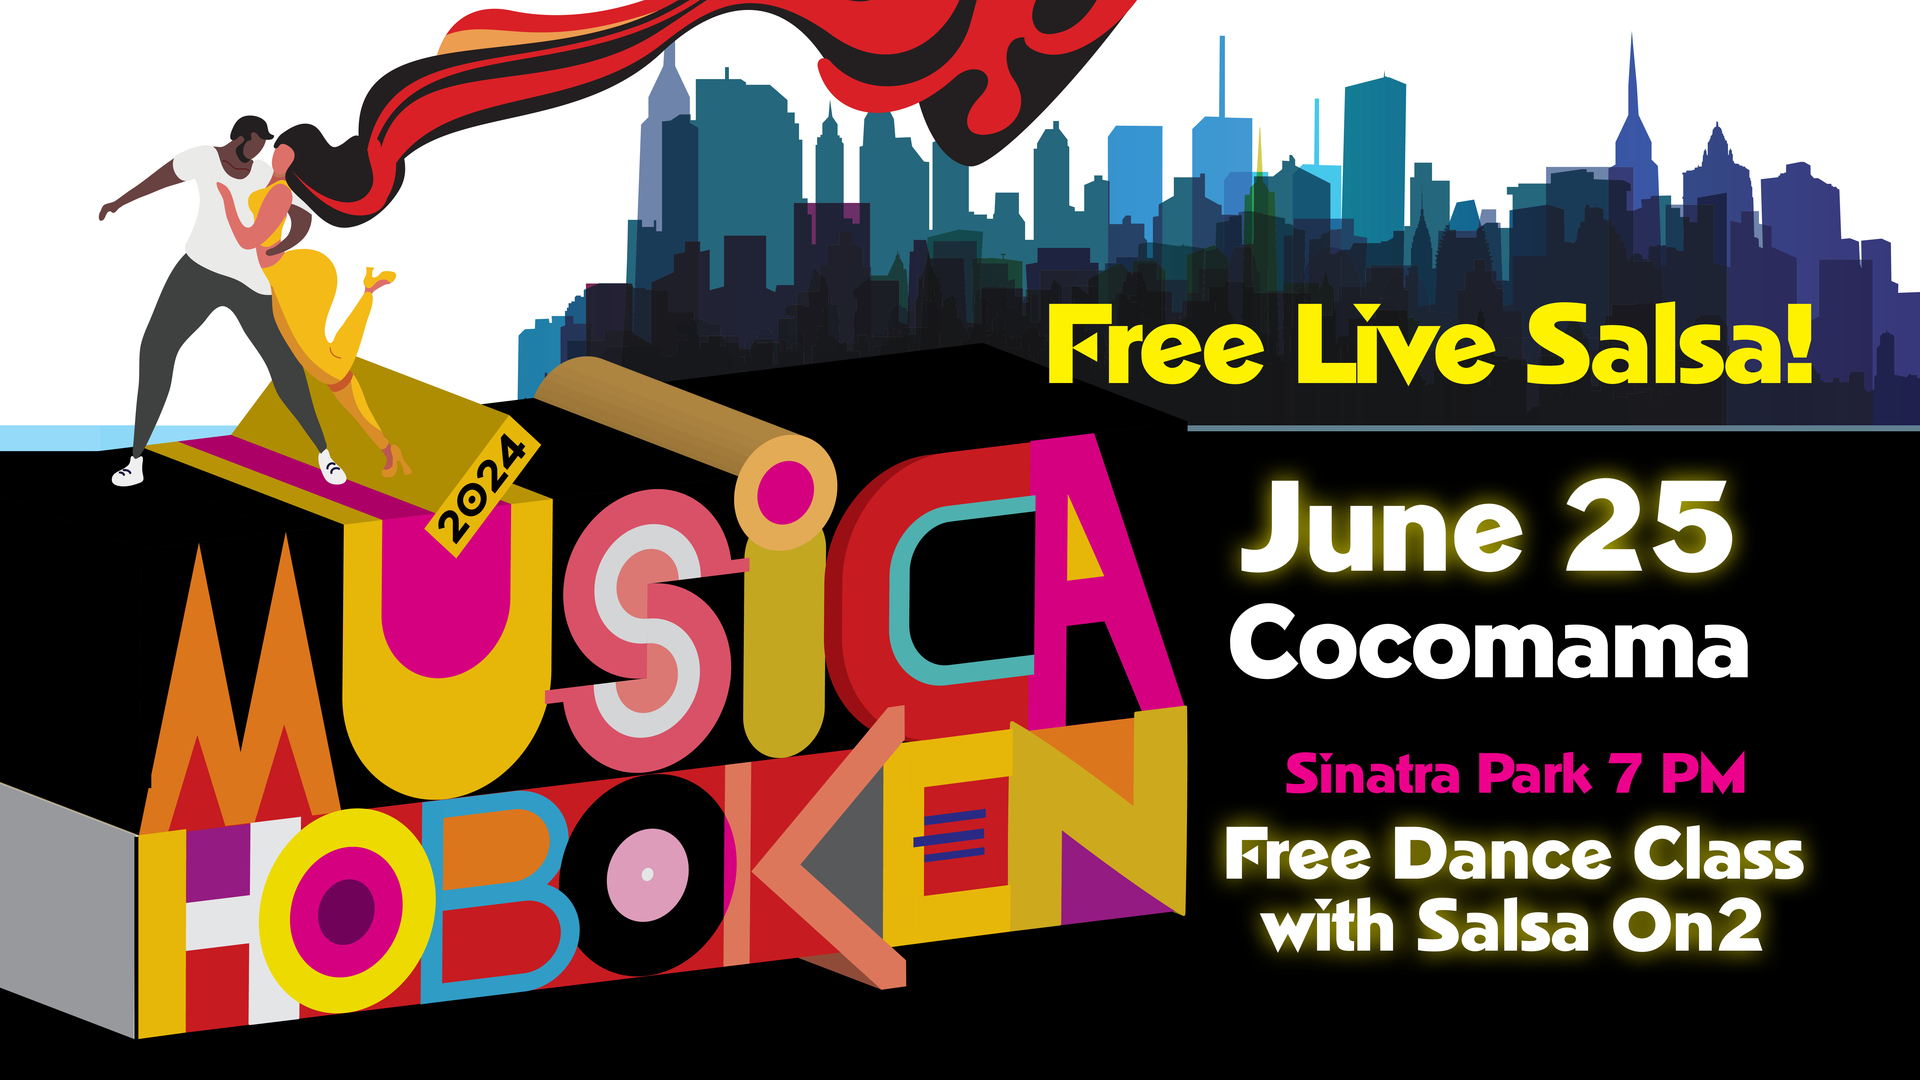 FREE Live Salsa in Sinatra Park! Hoboken Musica! It's Cocomama! Tuesday June 25th 7 PM Salsa lessons, Hoboken, New Jersey, United States